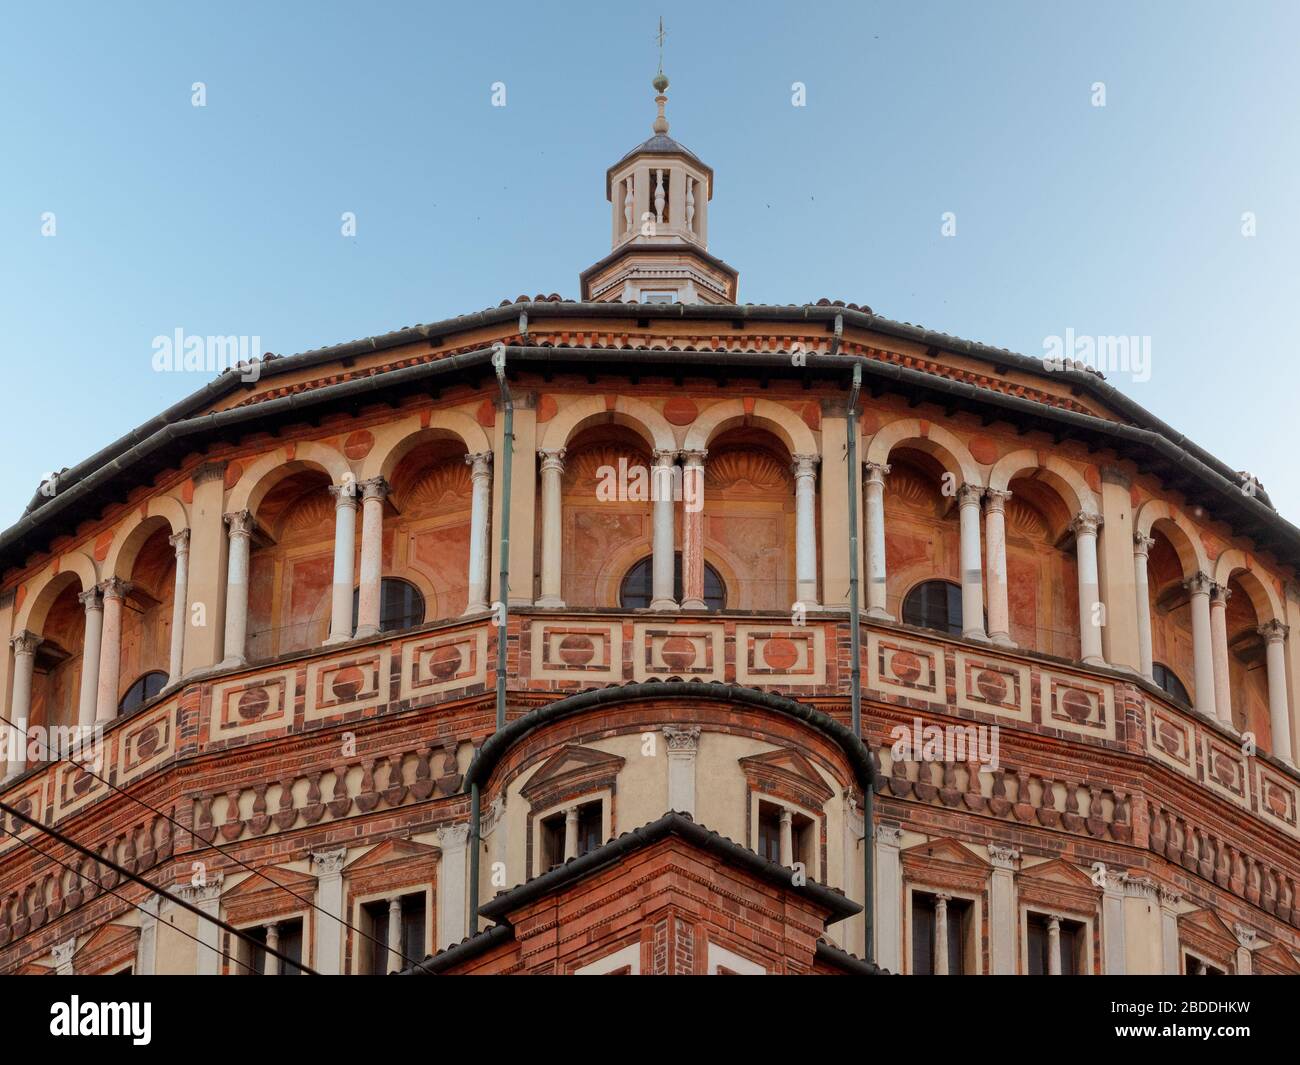 The large dome of the sanctuary of Santa Maria delle Grazie, a 15th century work by Bramante. Milan, Italy Stock Photo